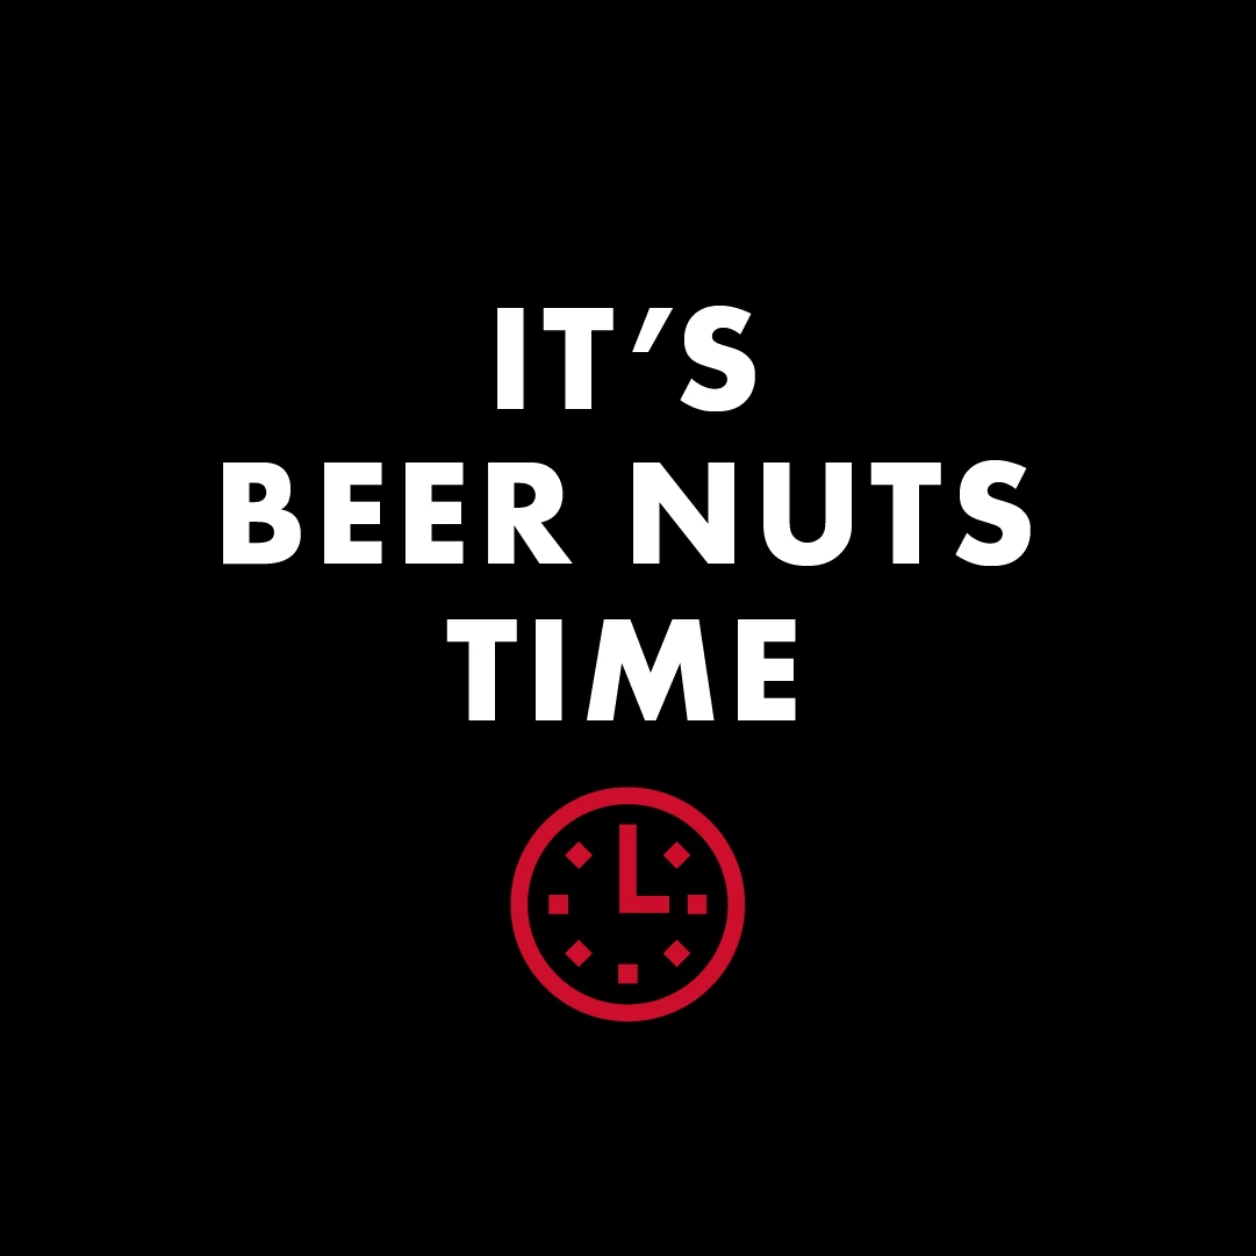 It's Beer Nuts time.